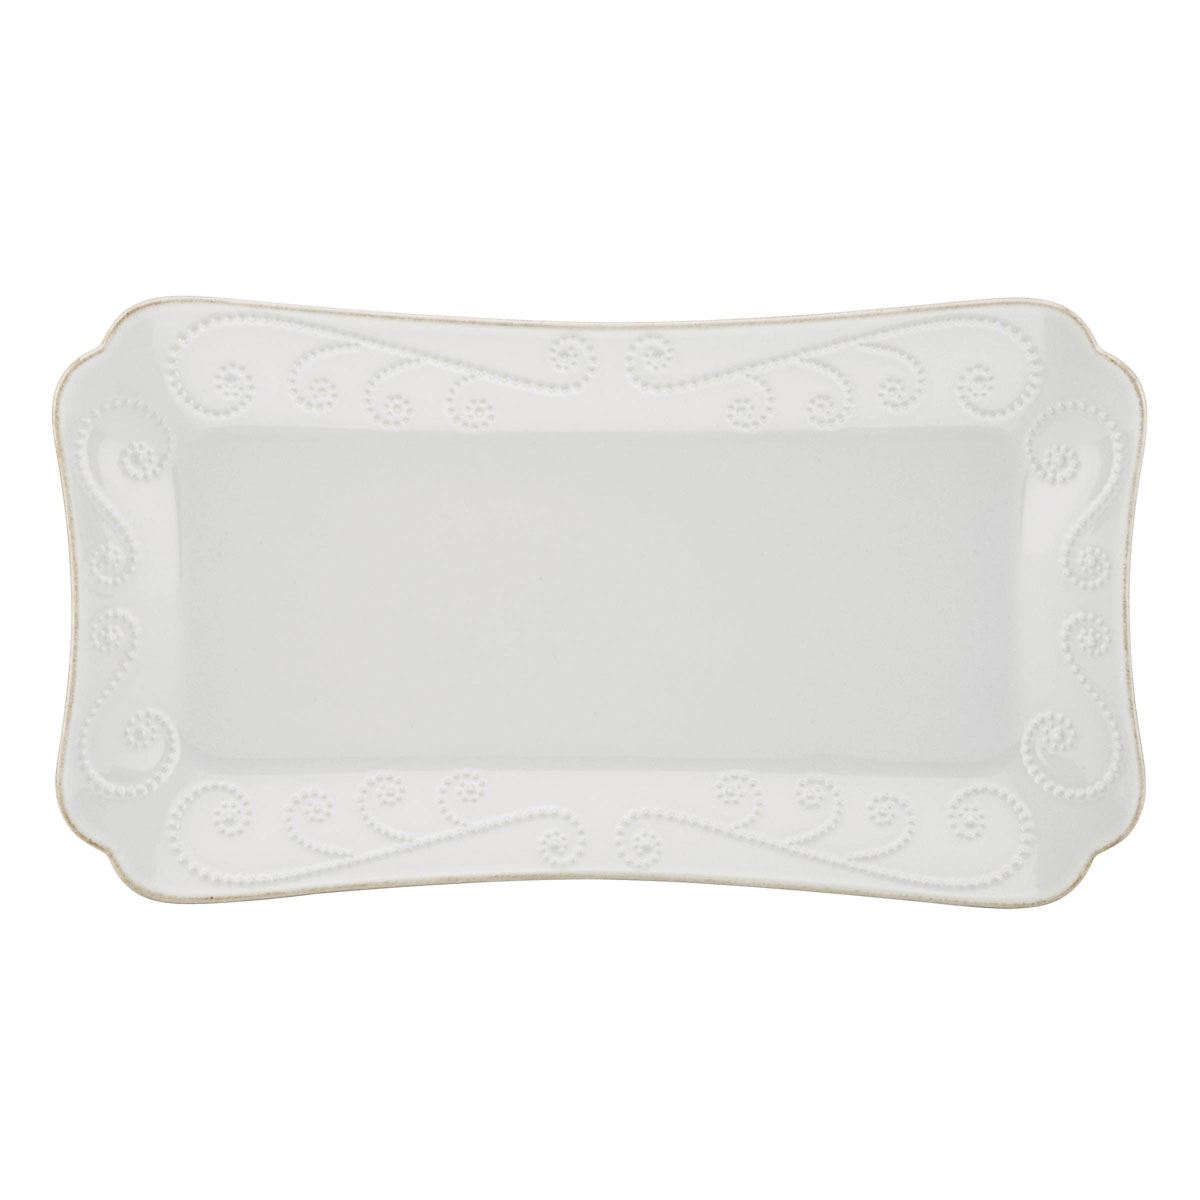 Lenox(R) French Perle White(tm) 13.5in. Hors D'oeuvre Tray